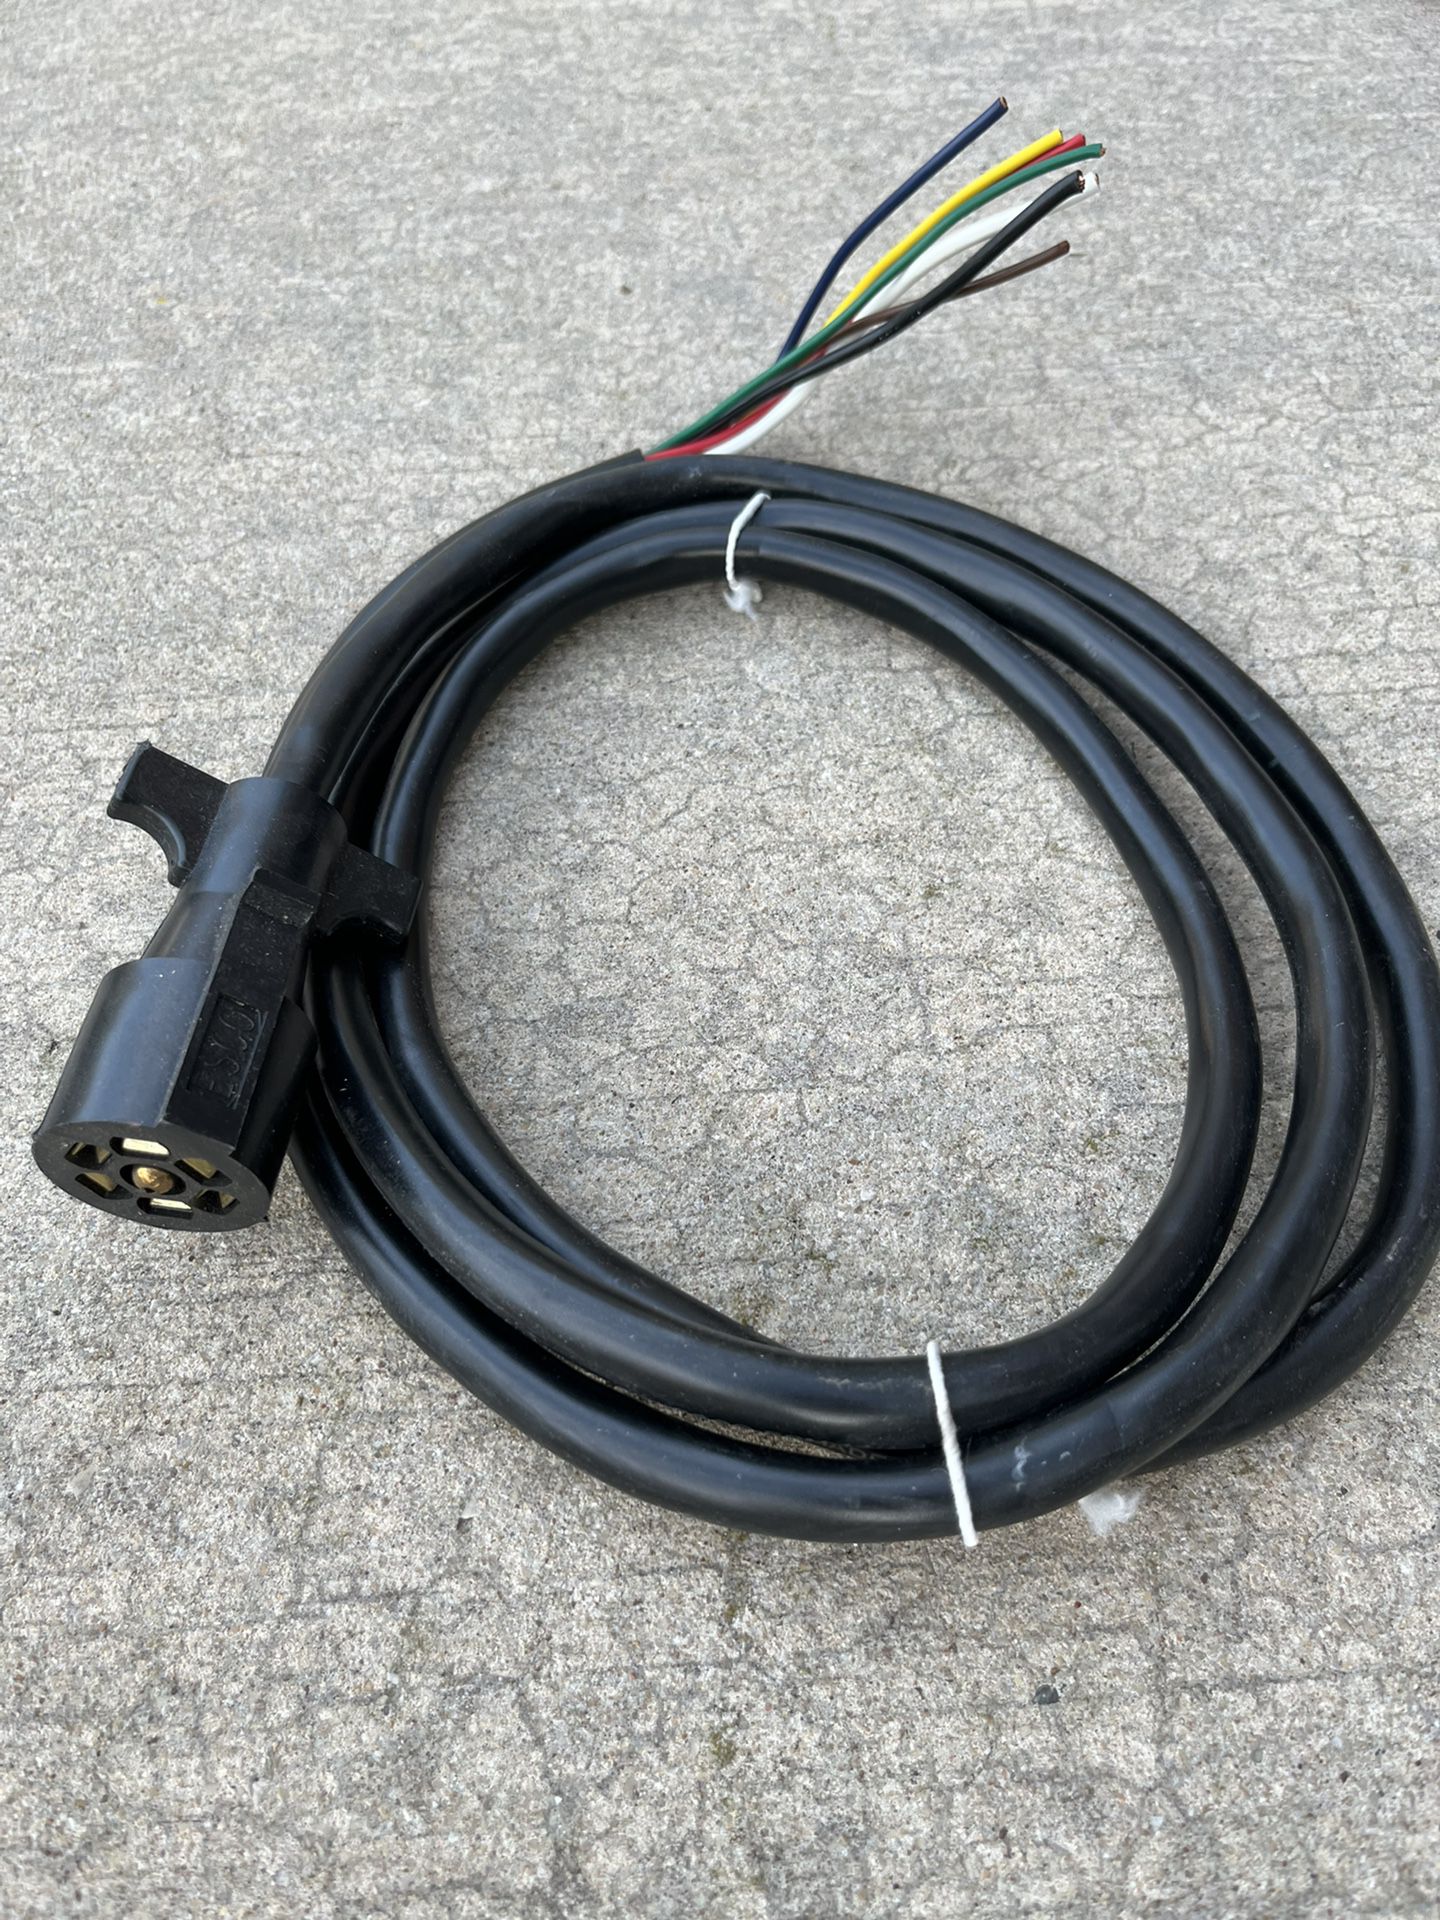 New 7- Pole Connector & New 7-Way Cable